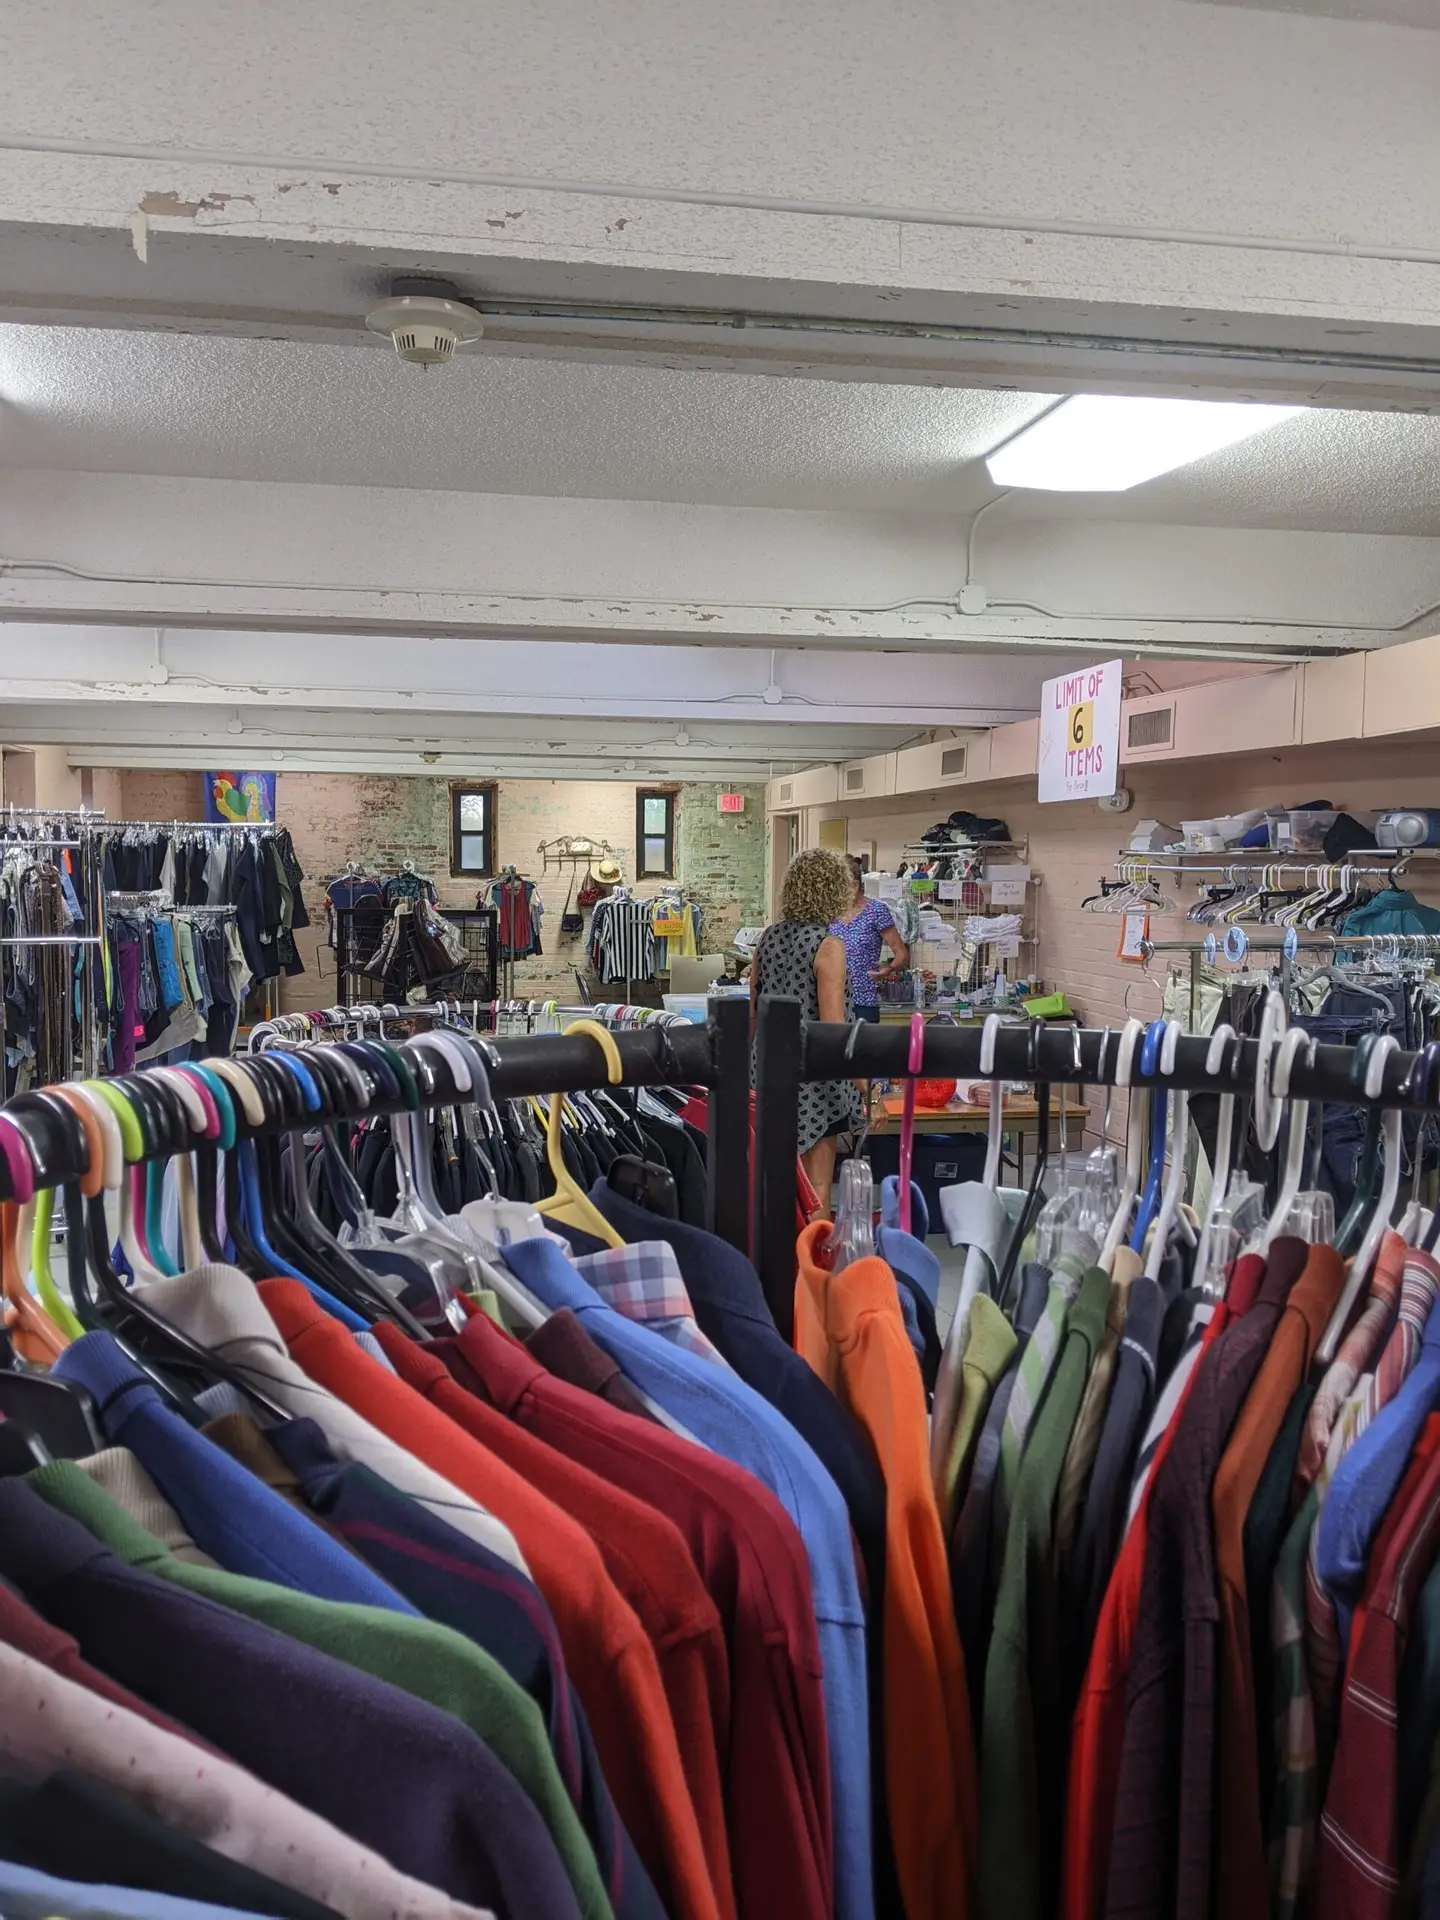 Inside the clothes closet at St. Pauls in Wilmington NC